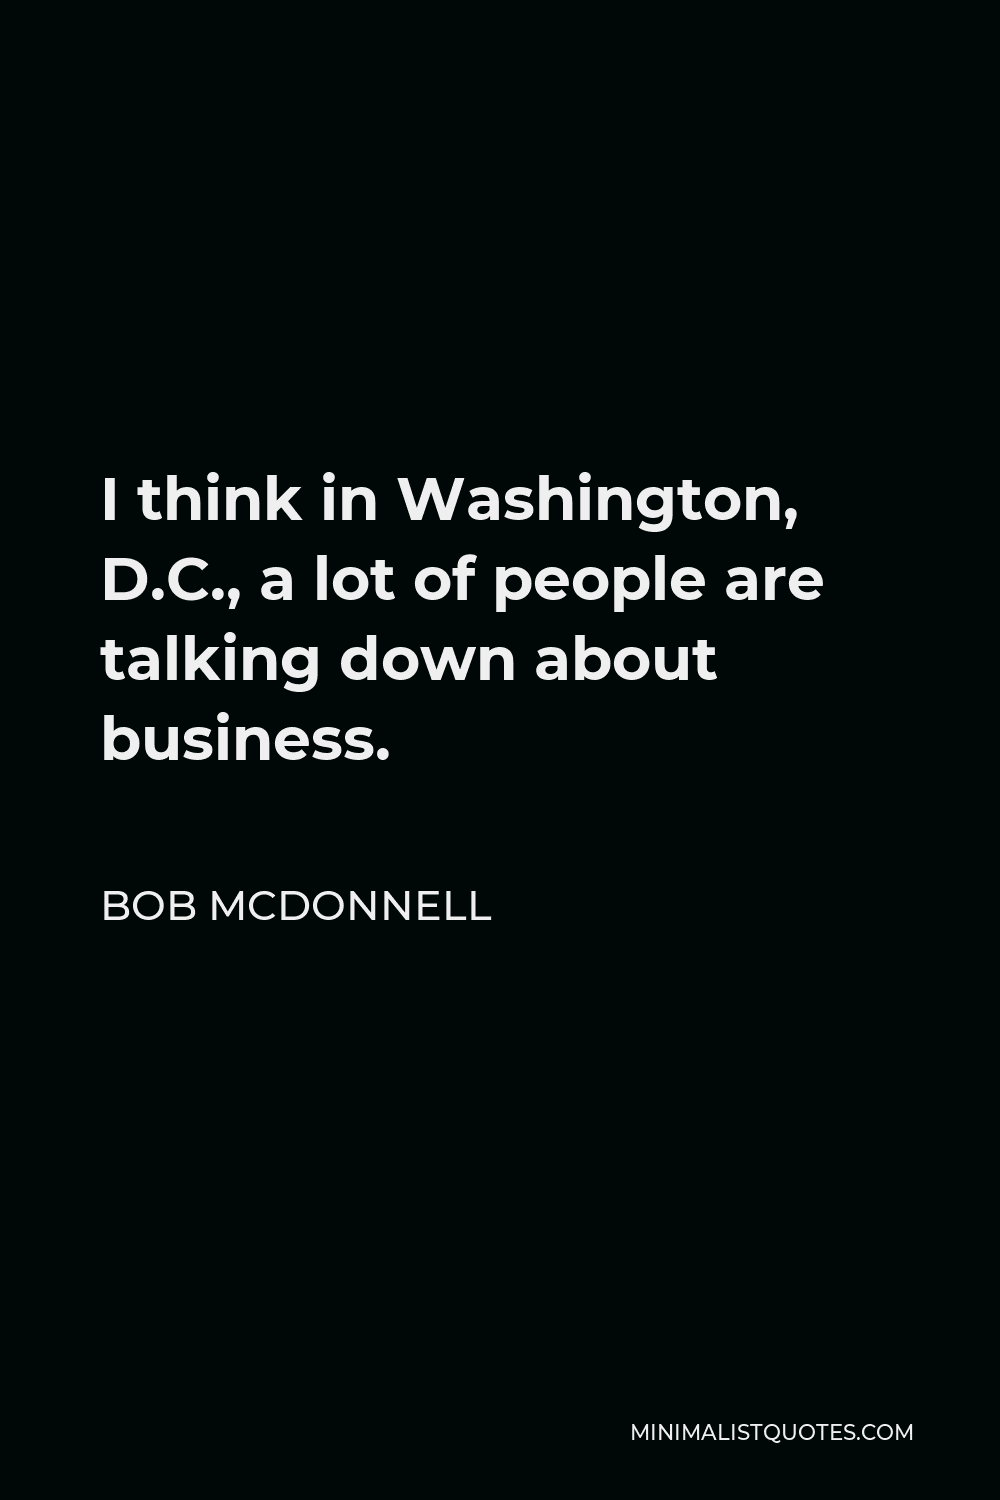 Bob McDonnell Quote - I think in Washington, D.C., a lot of people are talking down about business.